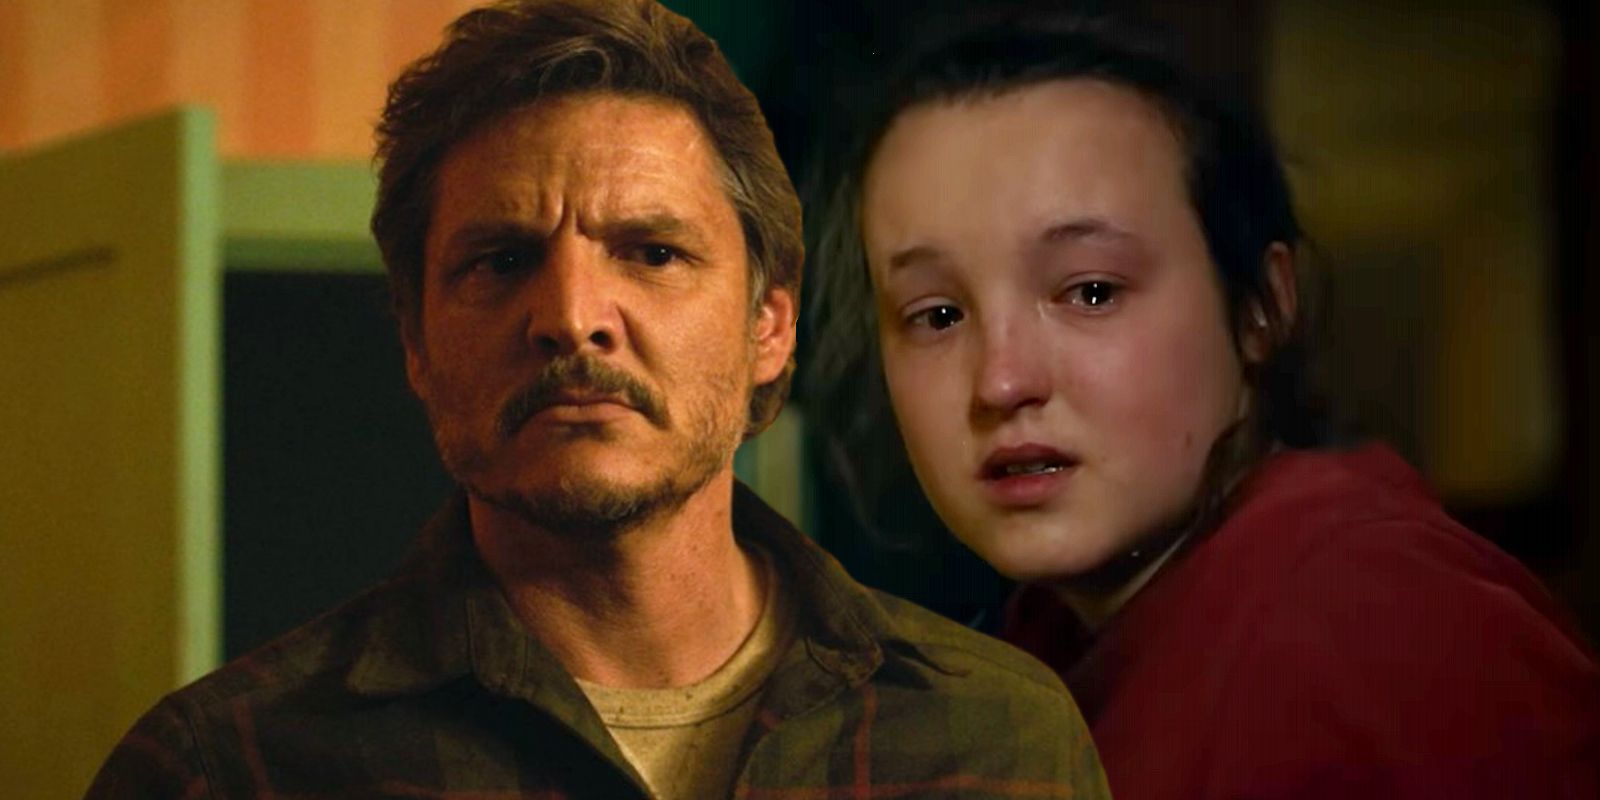 Pedro Pascal as Joel and Bella Ramsey as Ellie in HBO's The Last Of Us